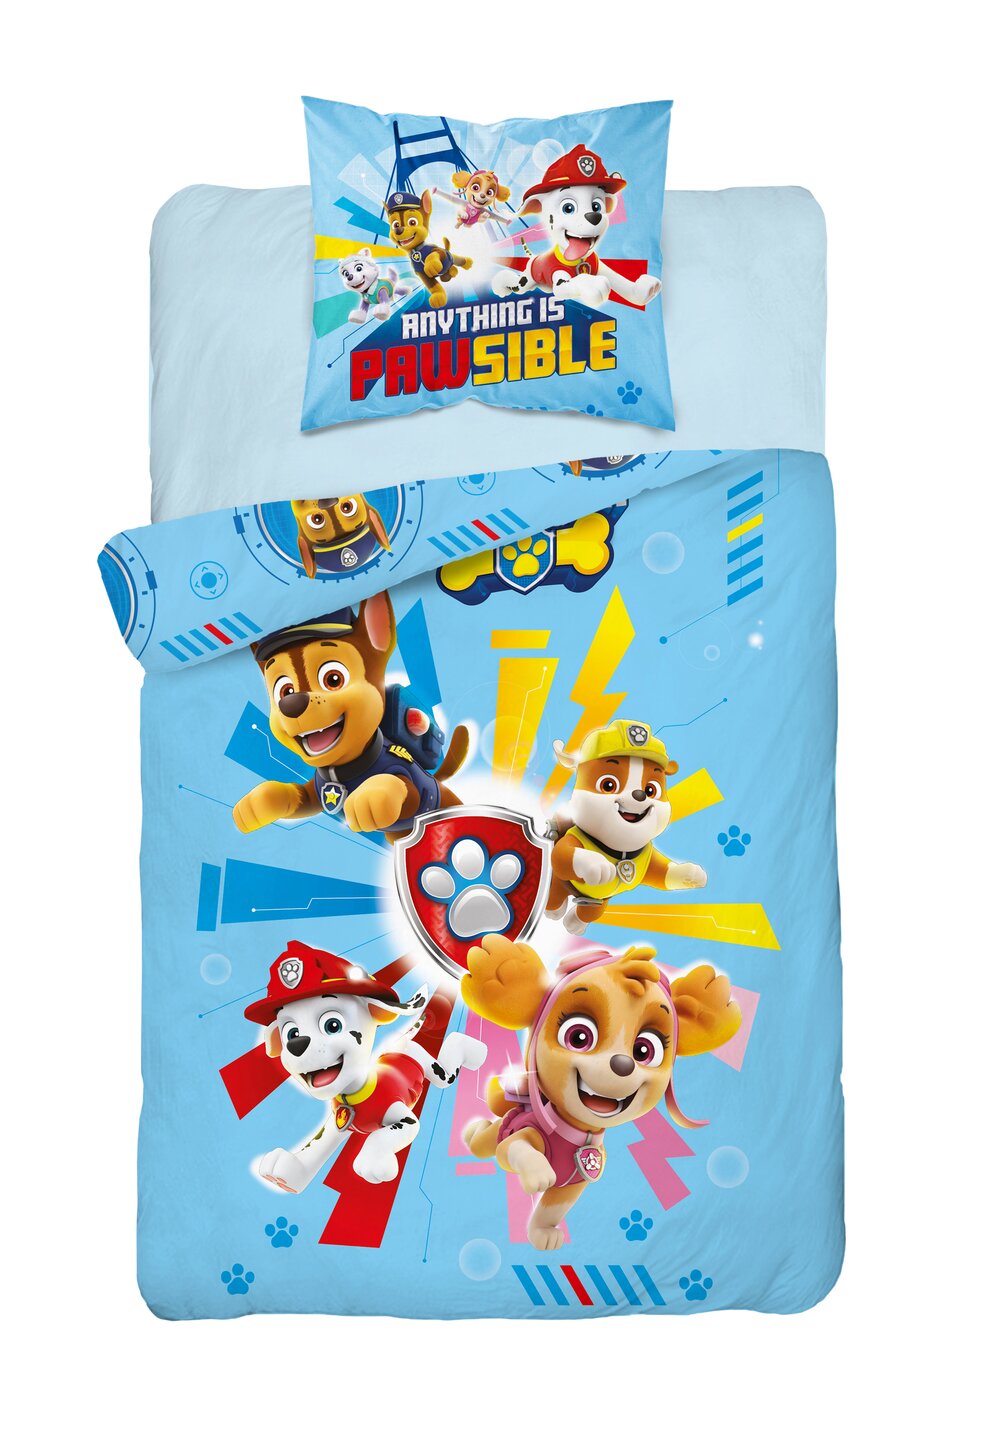 Lenjerie pat bumbac, Paw Patrol, Anything is PAWsible, albastra, 160×200 cm 160x200